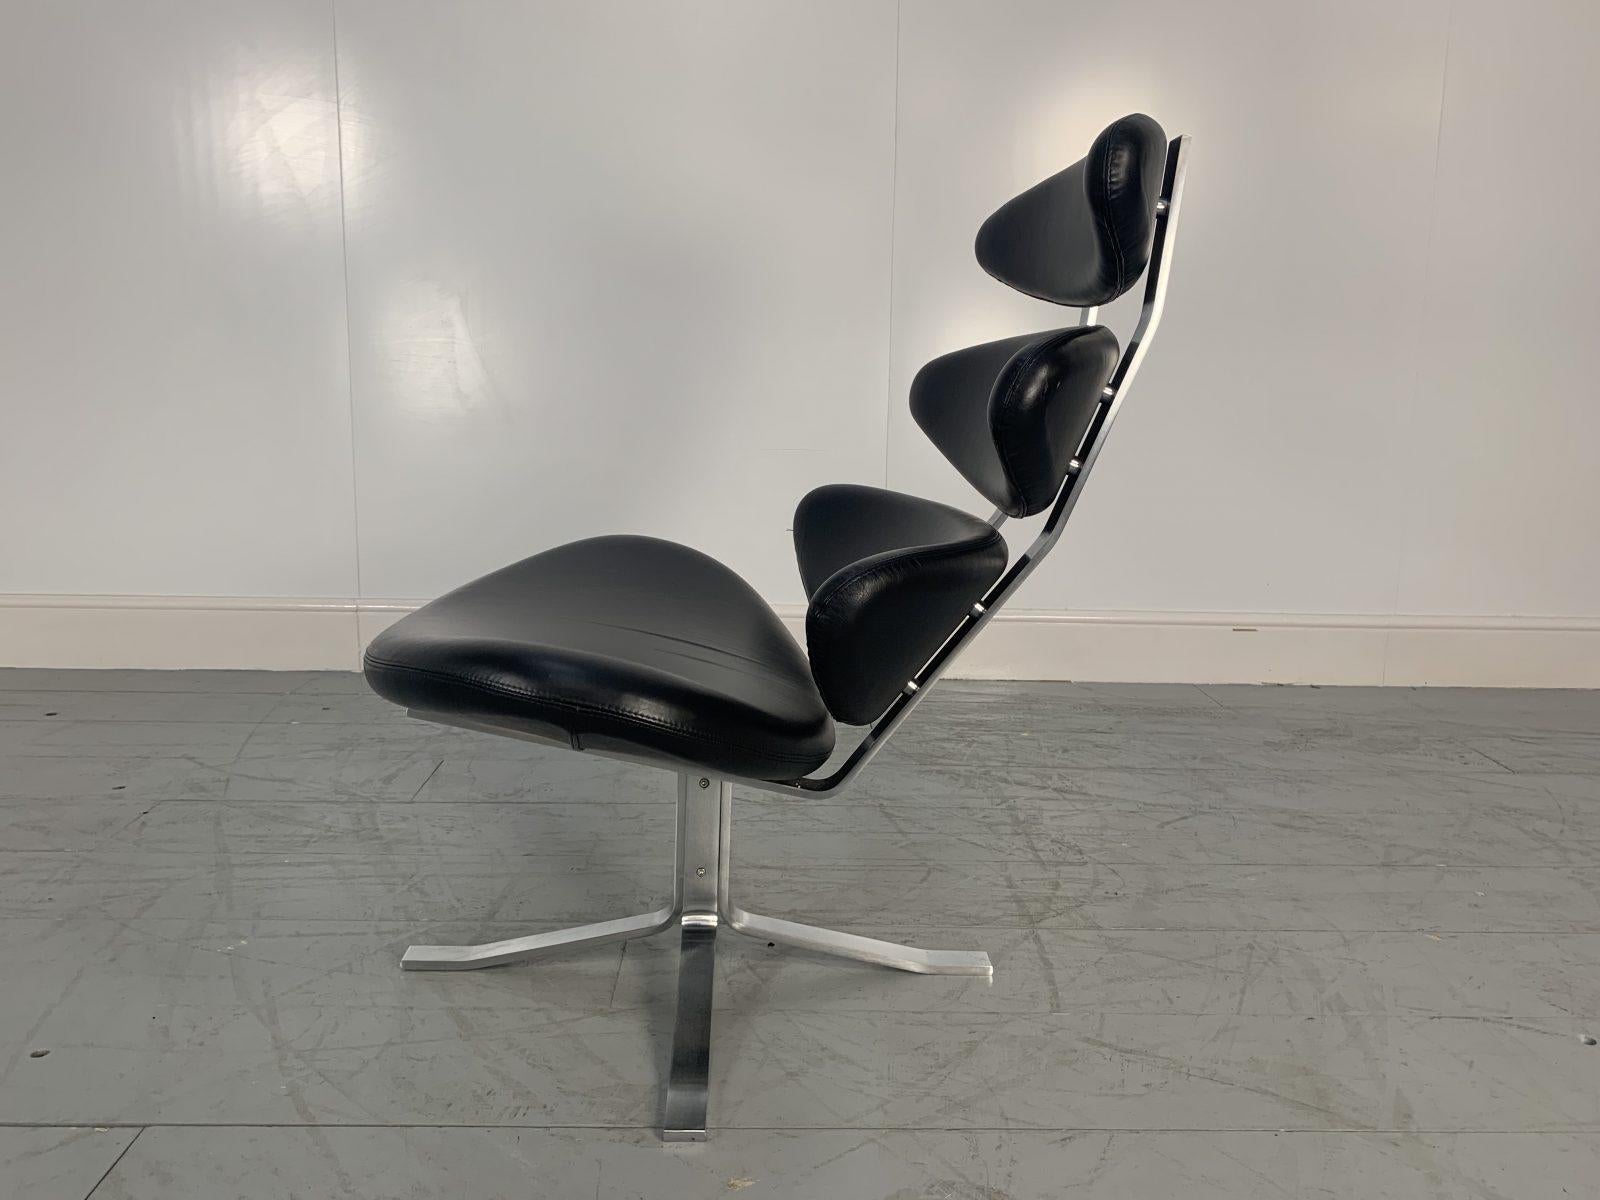 Spectacular Pair of Erik Jorgensen “Corona” EJ5 Chairs in Black “Apache” Leather For Sale 4